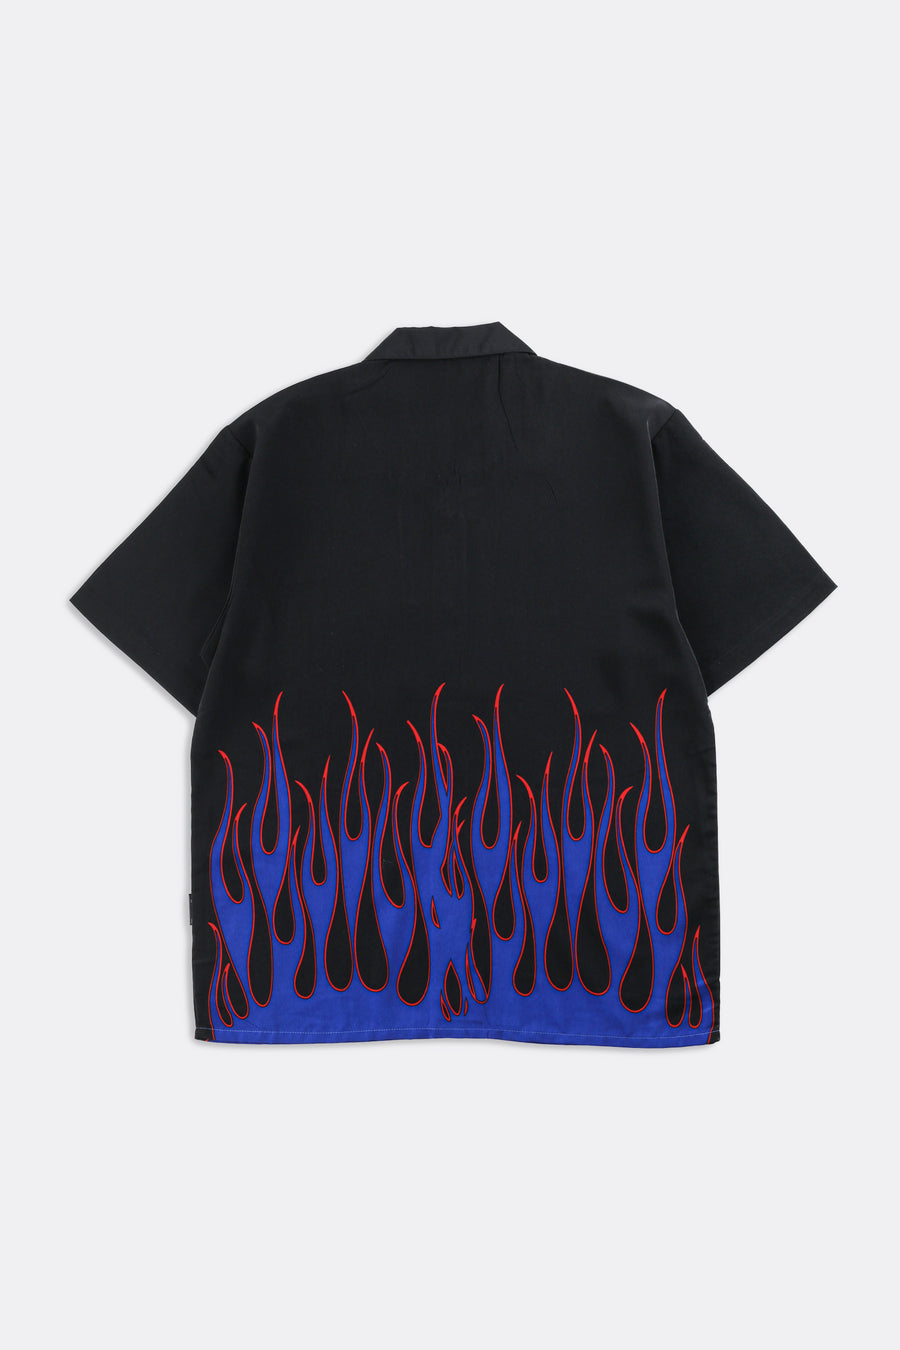 Deadstock Dragonfly Flames Camp Shirt - M, L, XL